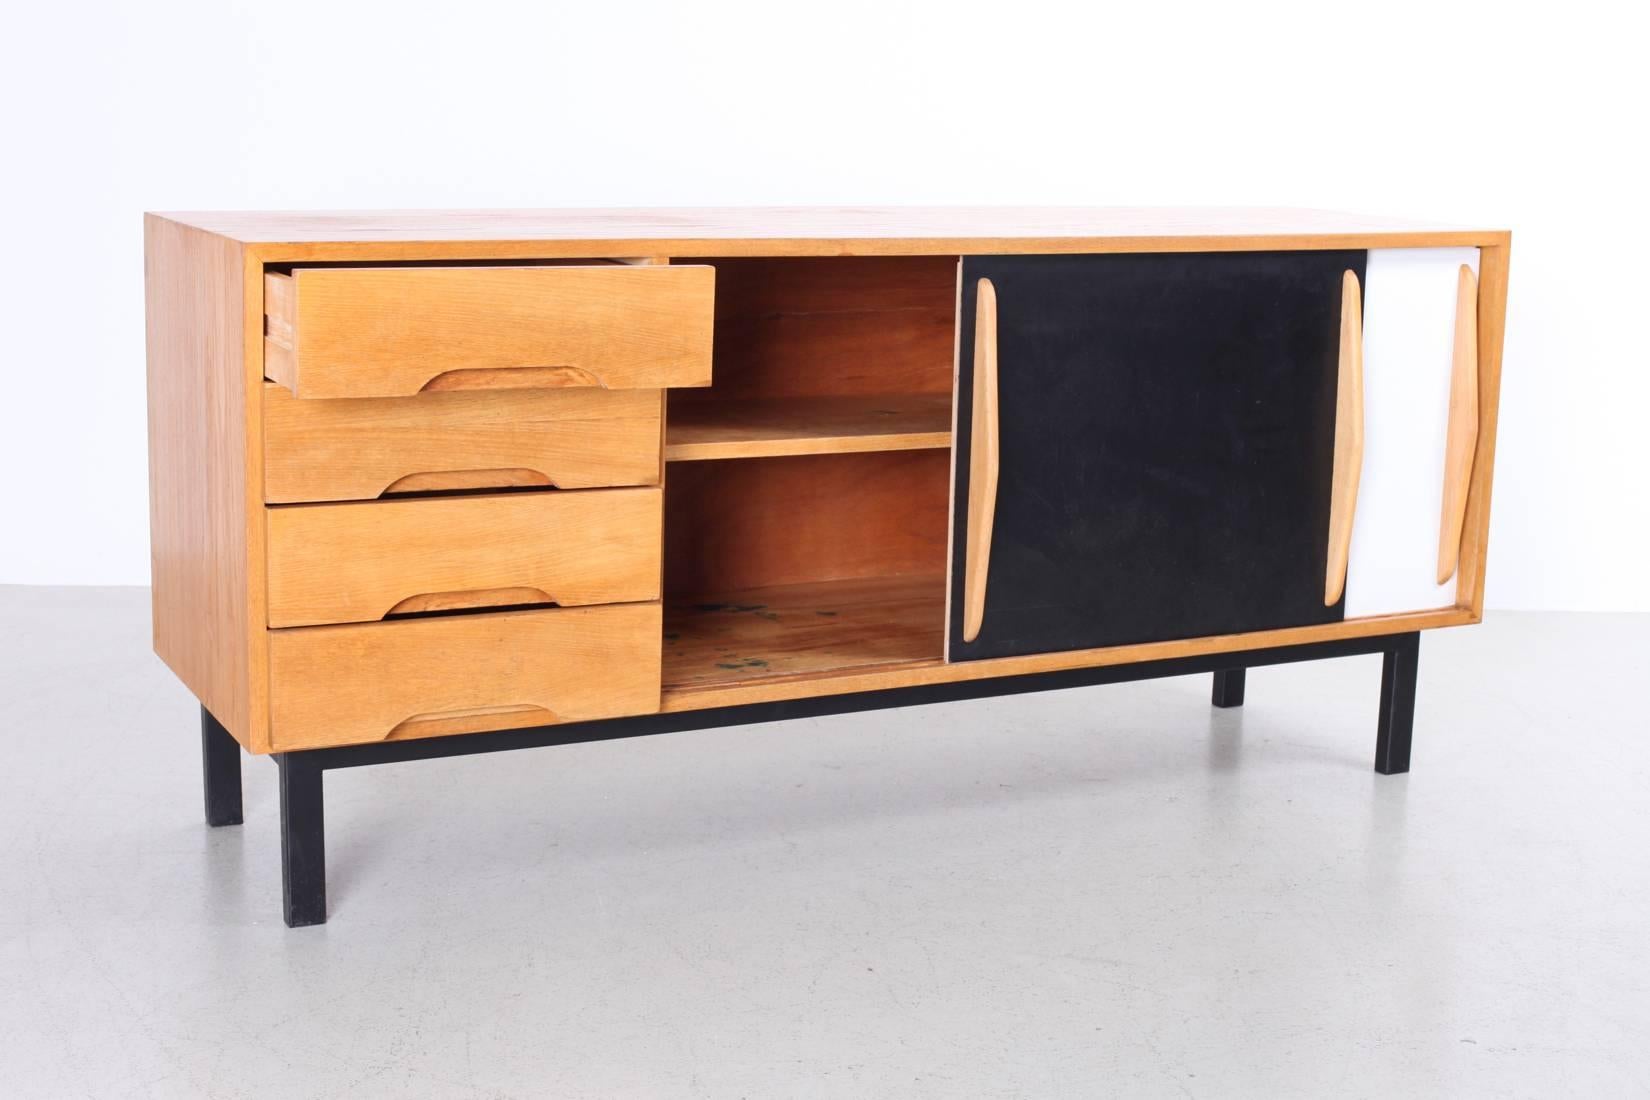 Charlotte Perriand Cansado sideboard in ash. Produced in France, circa 1958 by Steph Simon.
From Guinea, Islamic Republic of Mauritania, Mali, Africa.